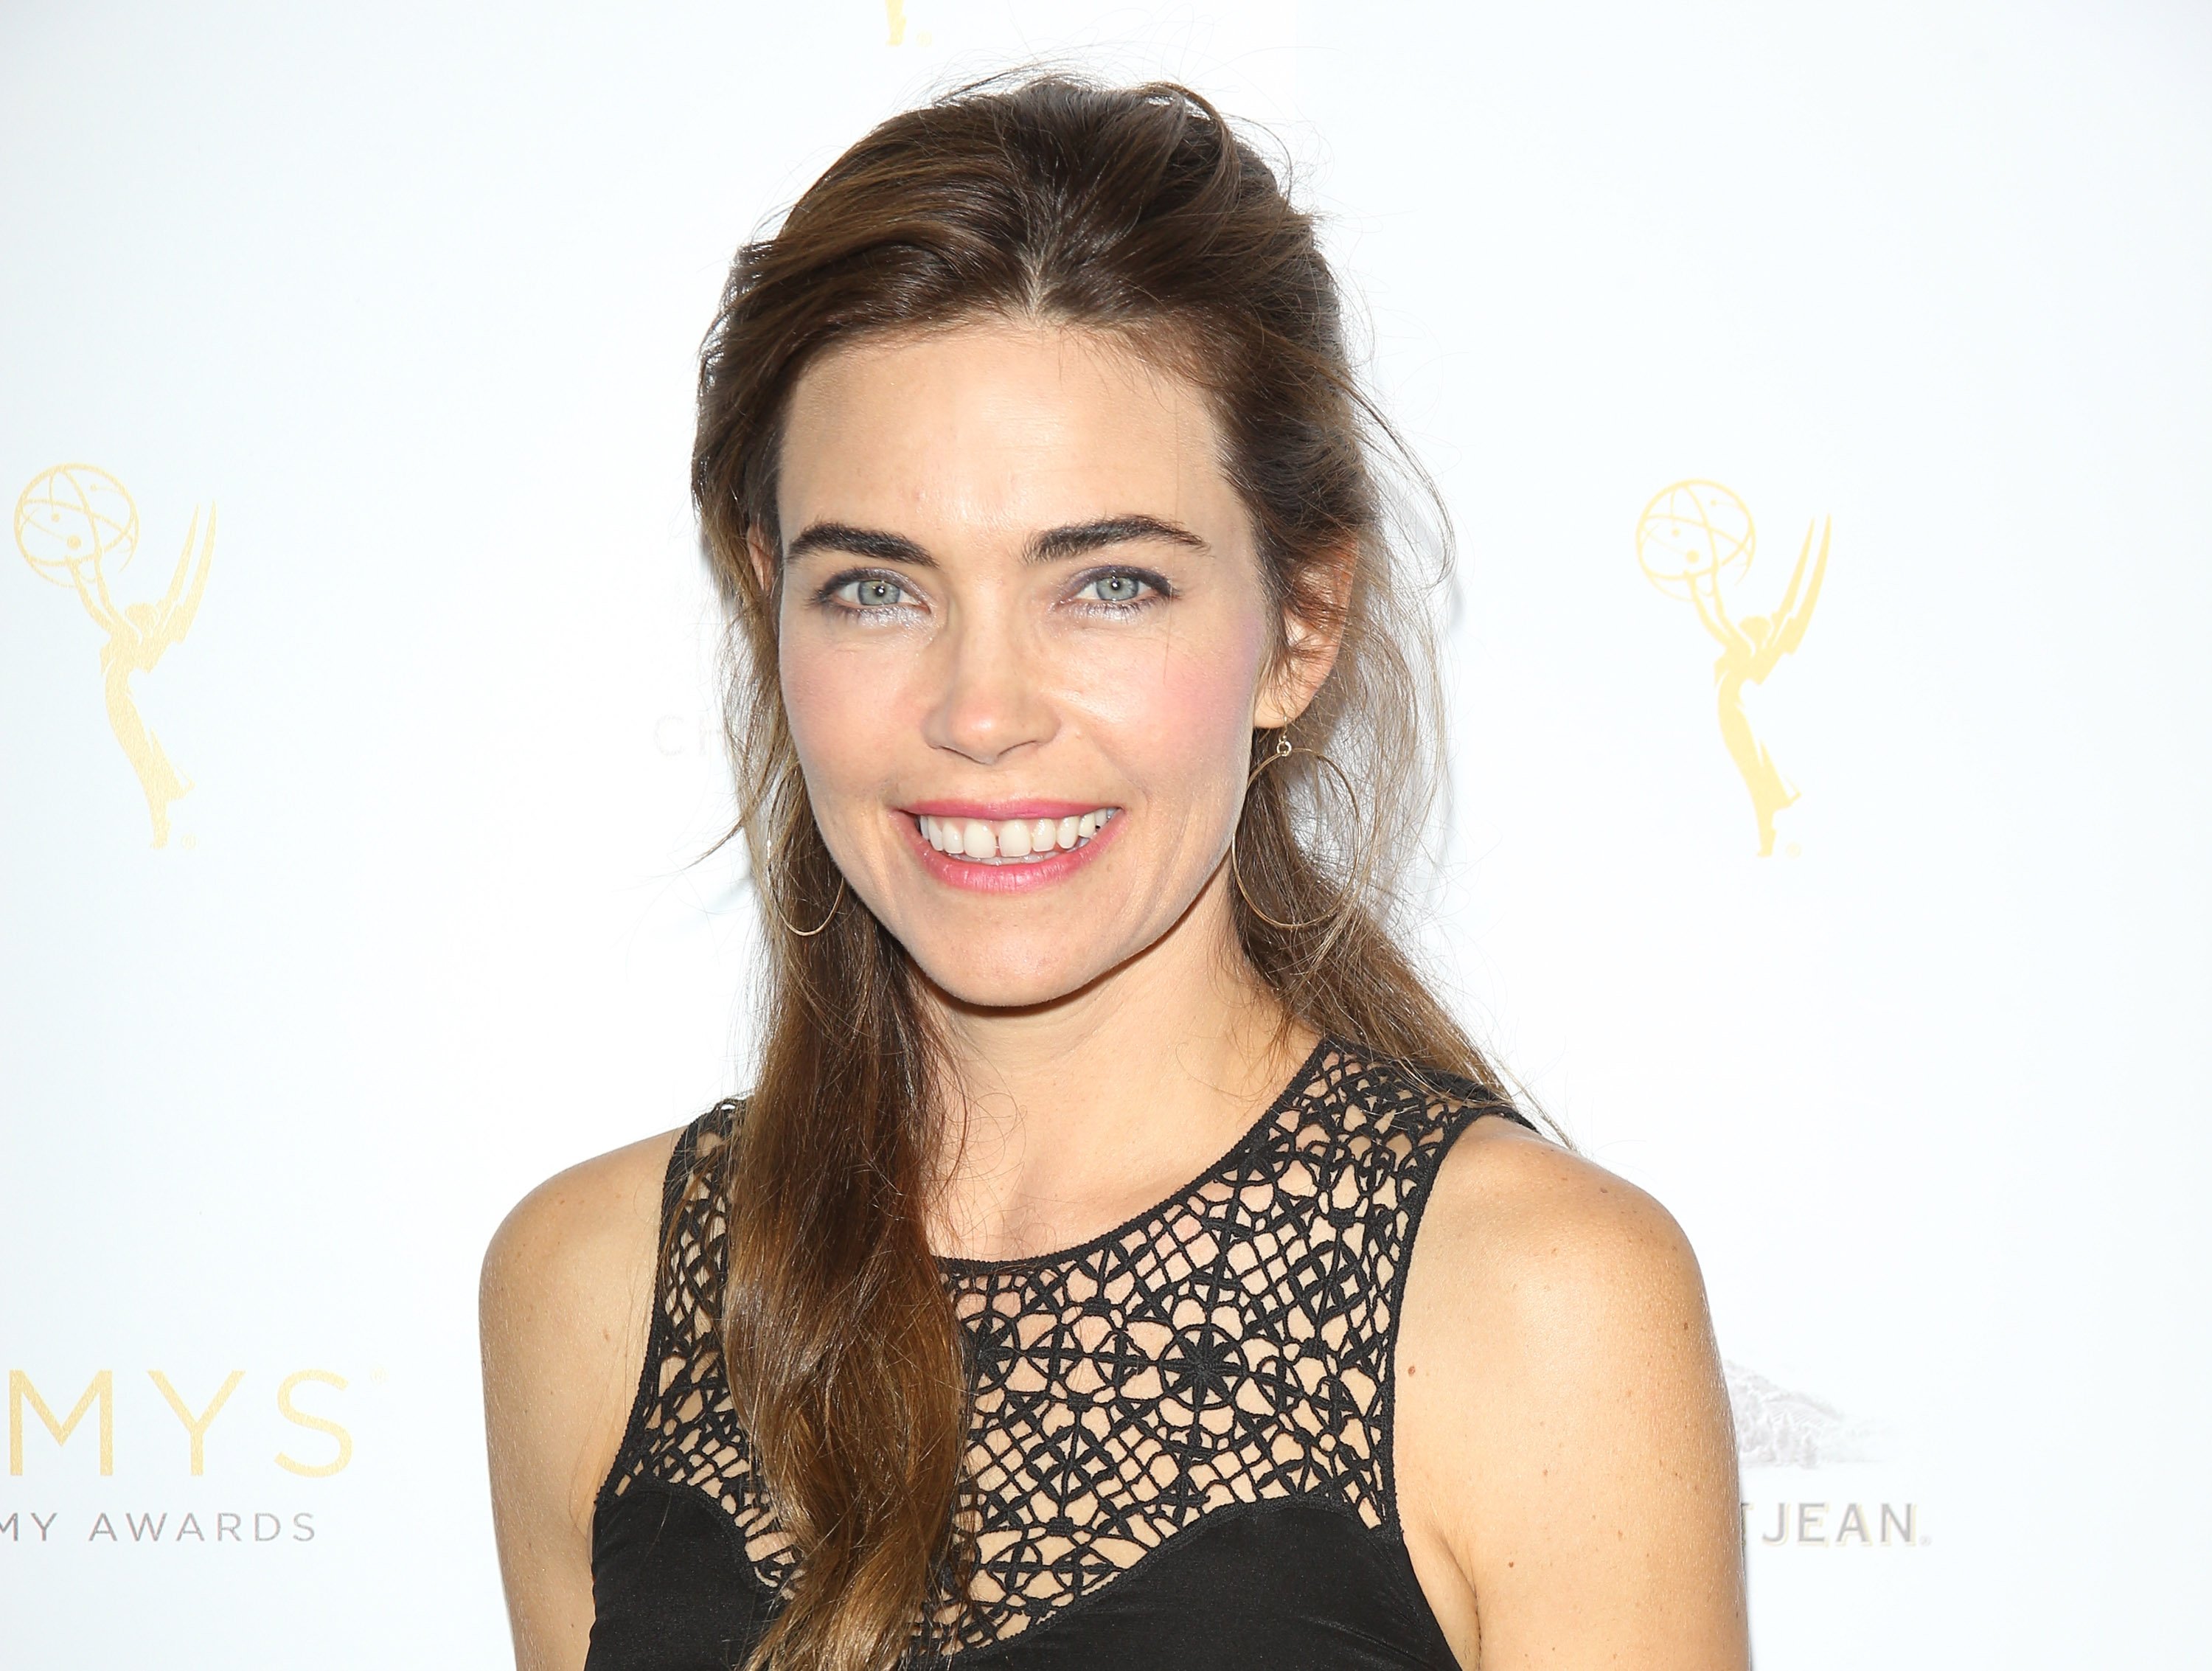 'The Young and the Restless' star Amelia Heinle wearing a black dress and smiling during a red carpet appearance.